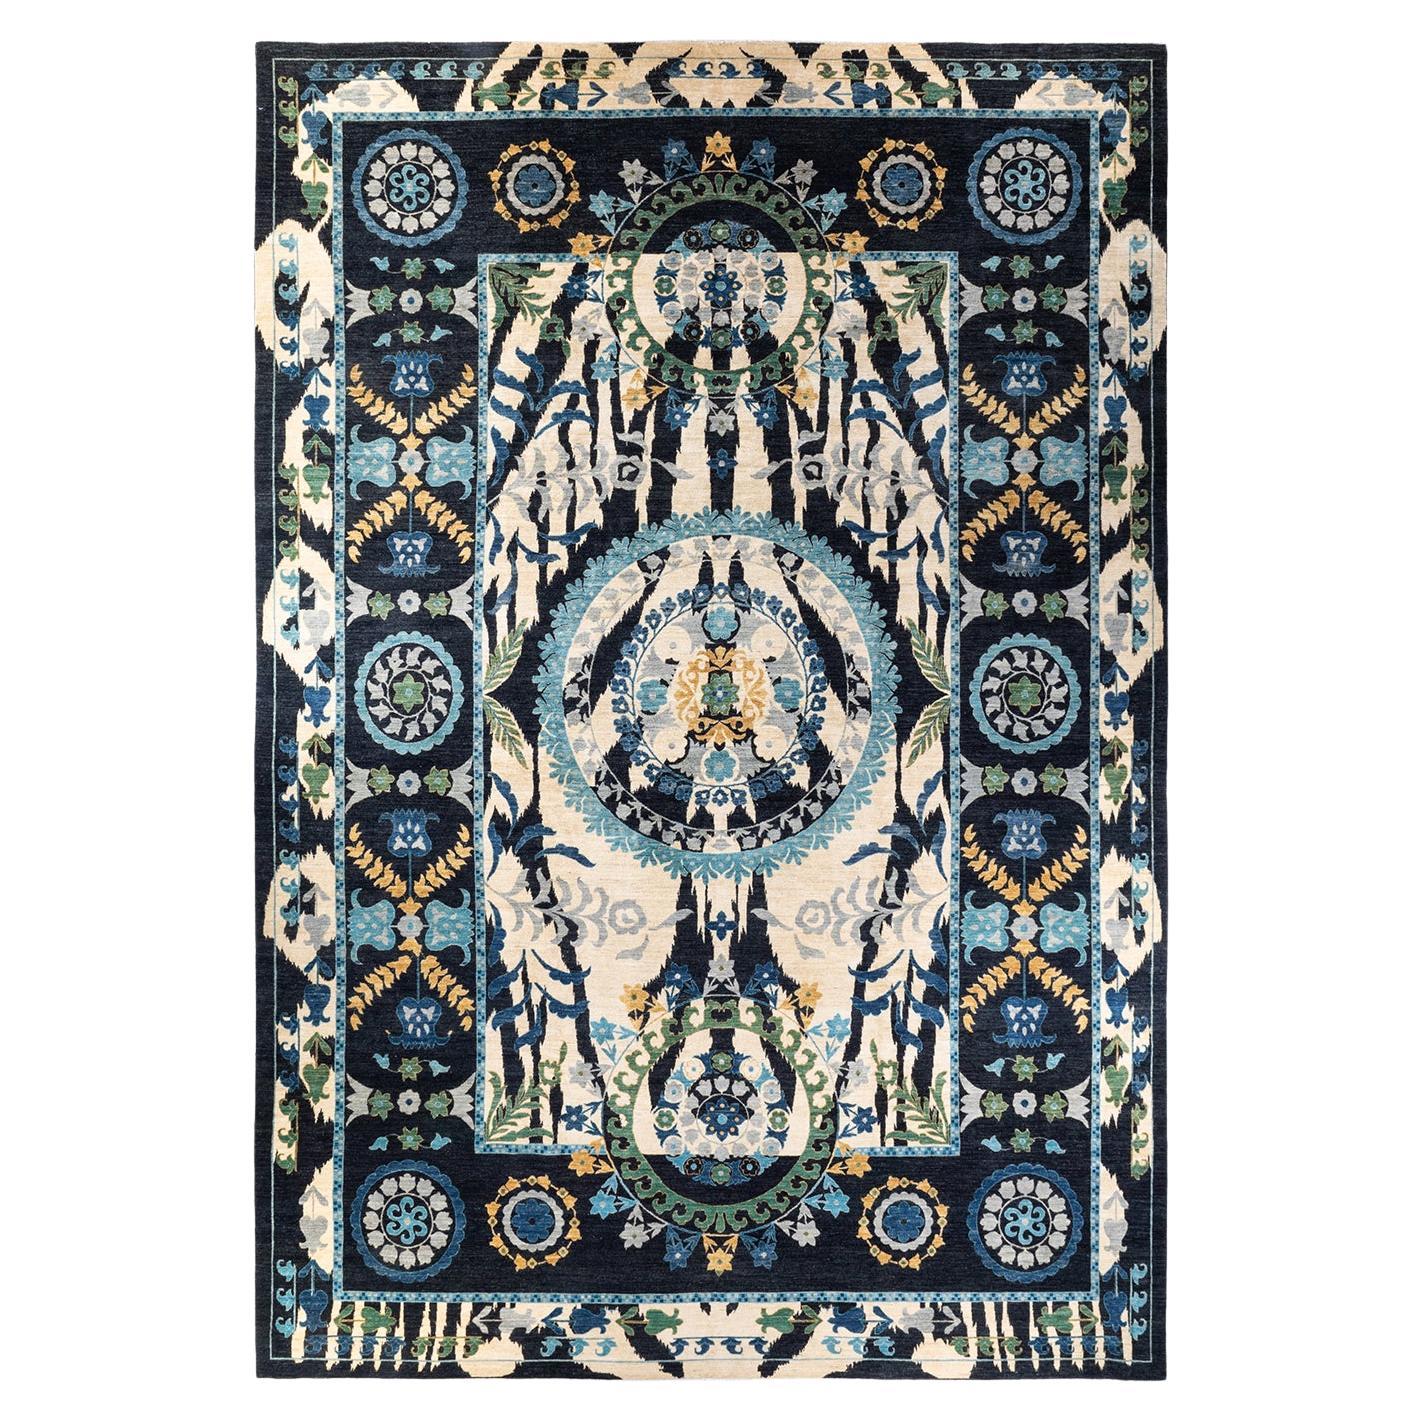 One-of-a-kind Hand Knotted Wool Suzani Black Area Rug